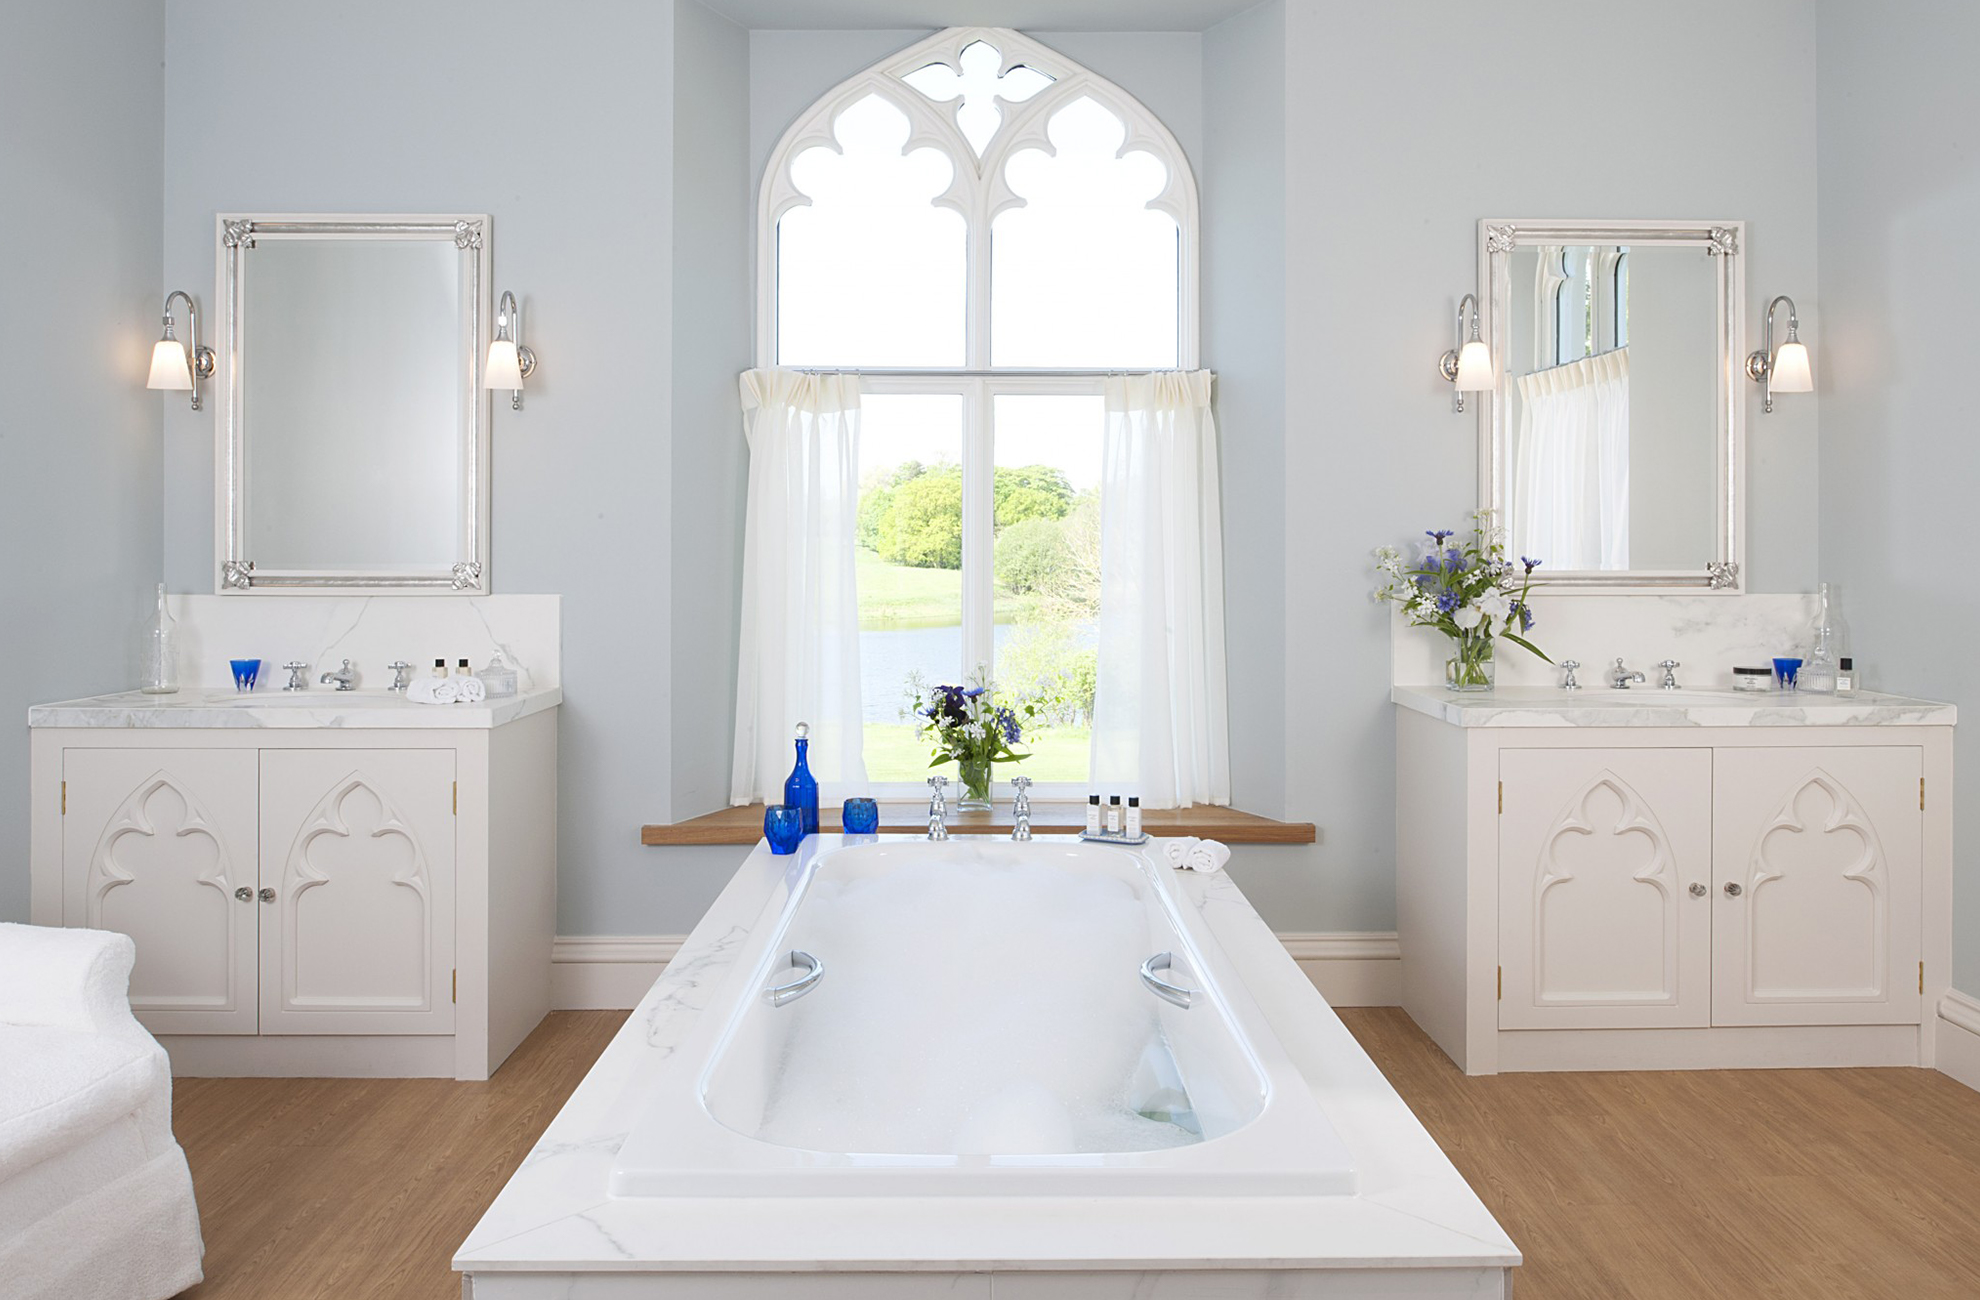 Salamanca bathroom luxurious accommodation at Combermere Abbey